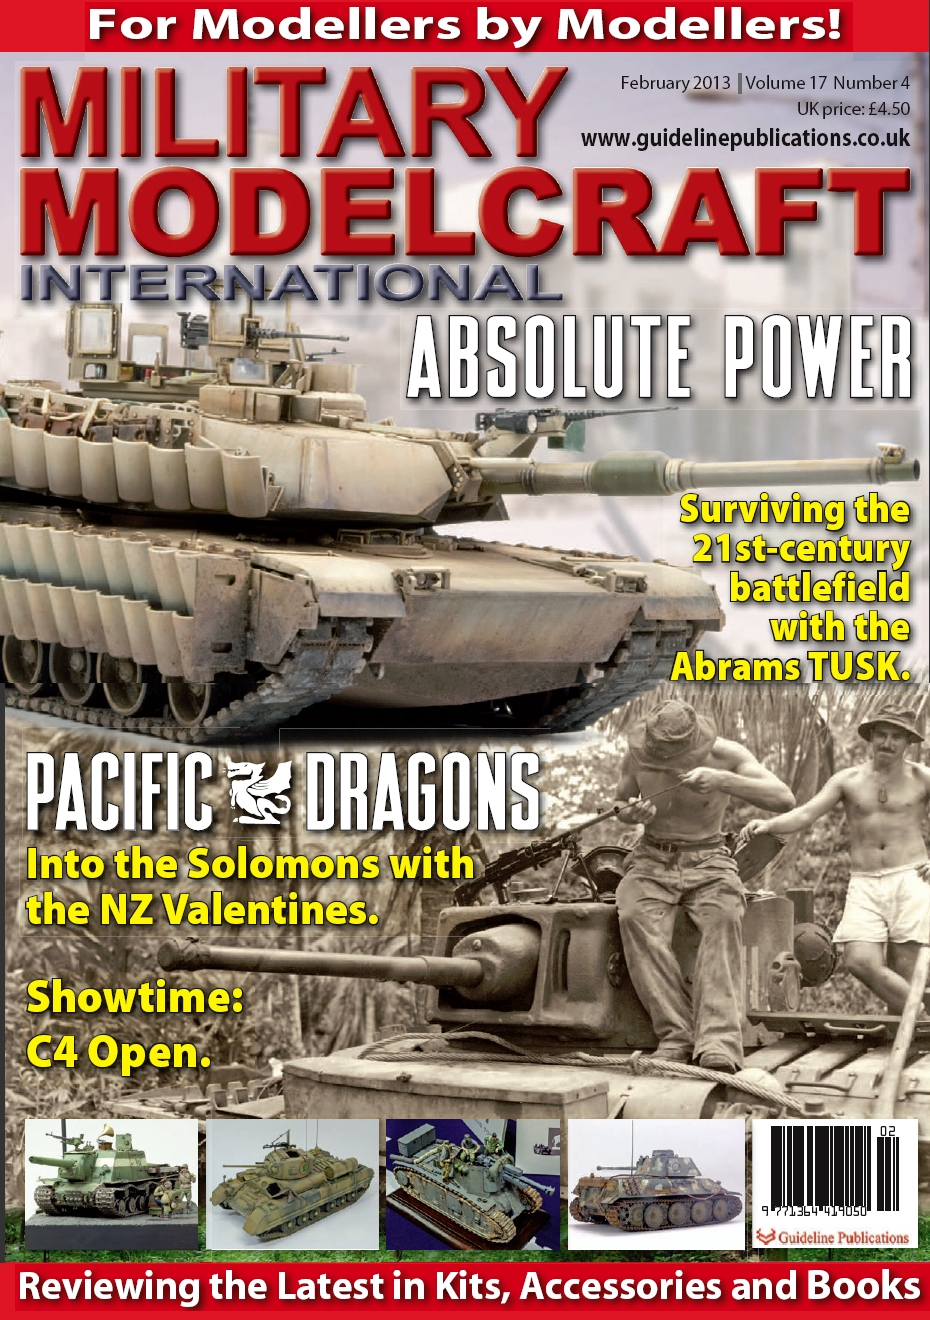 Guideline Publications Ltd Military Modelcraft February 2013 vol 17 - 4 